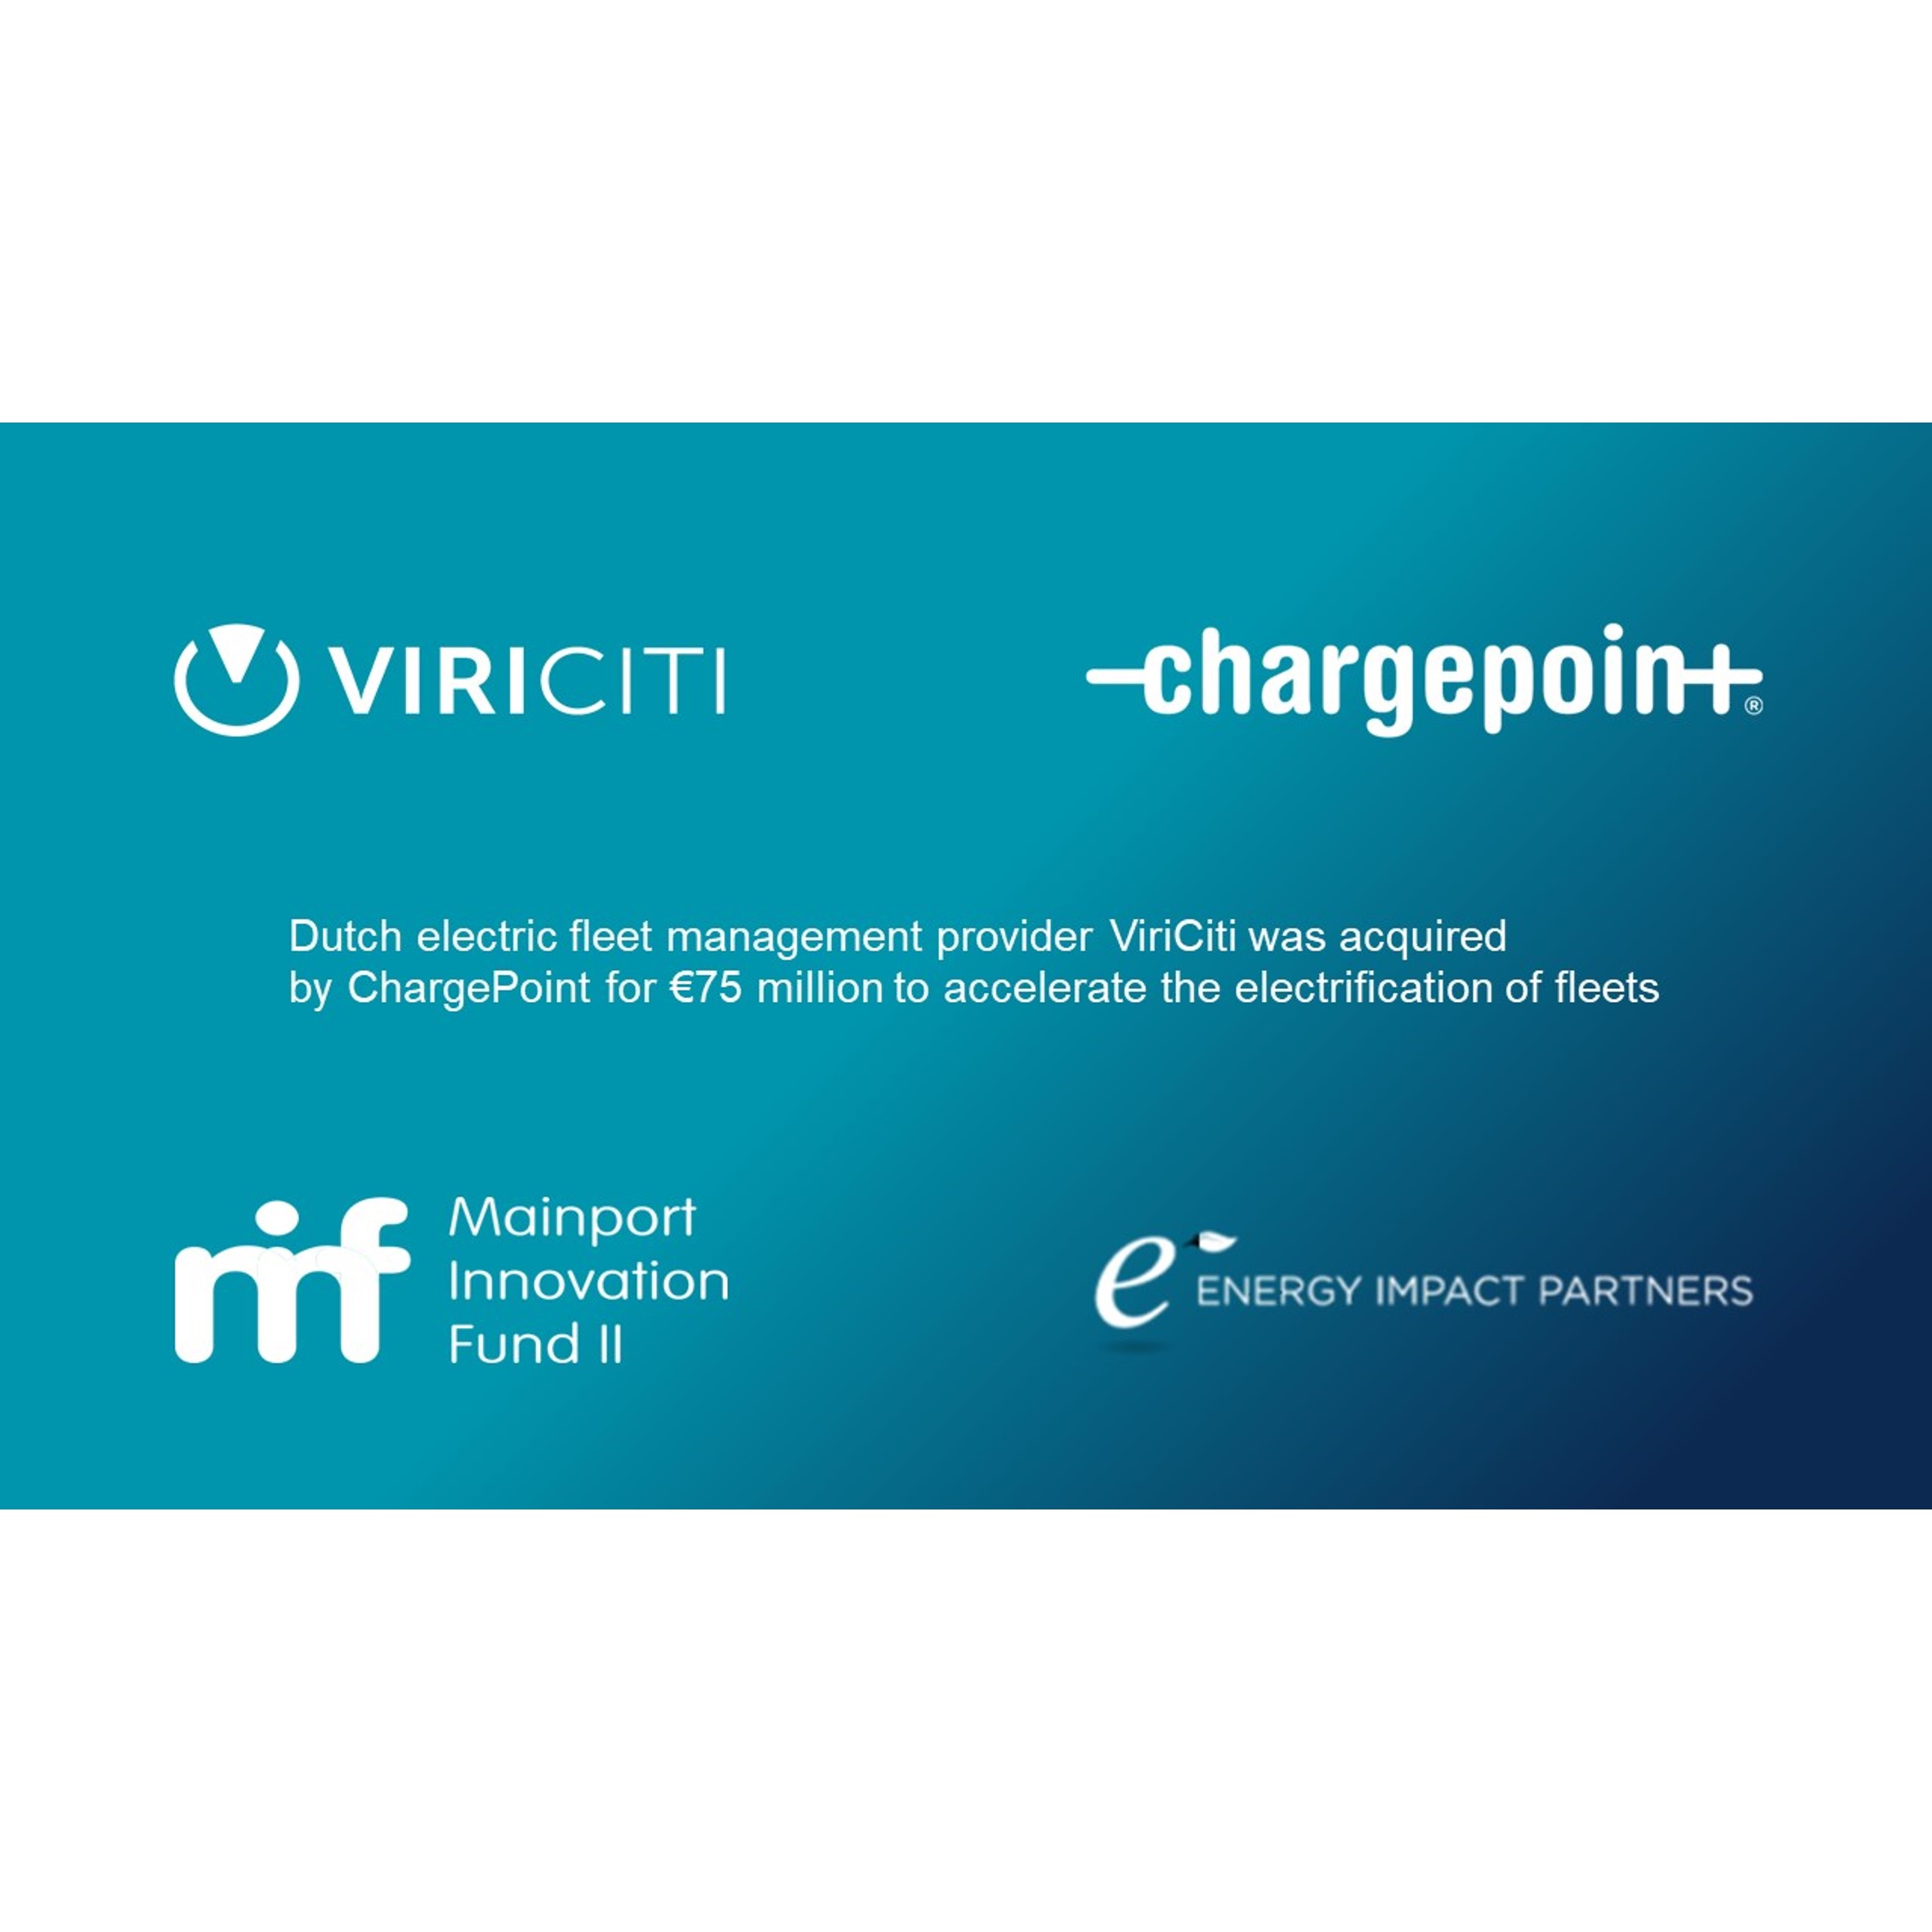 Dutch electric fleet management provider ViriCiti was acquired by ChargePoint to accelerate the electrification of fleets